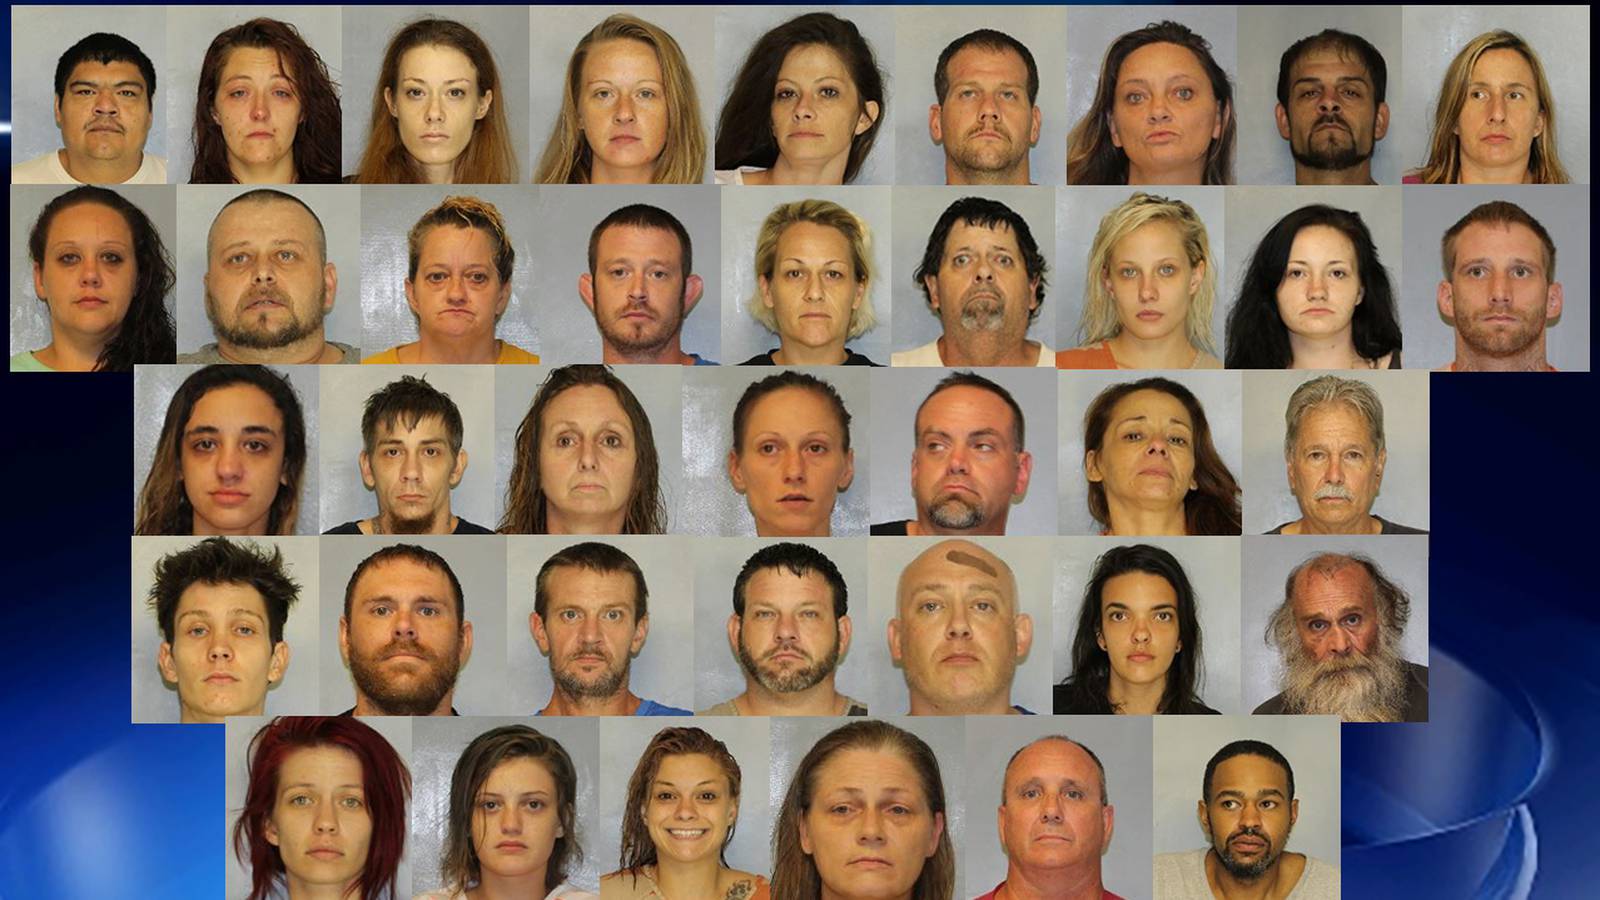 48 people arrested in north drug trafficking bust, officials say WSBTV Channel 2